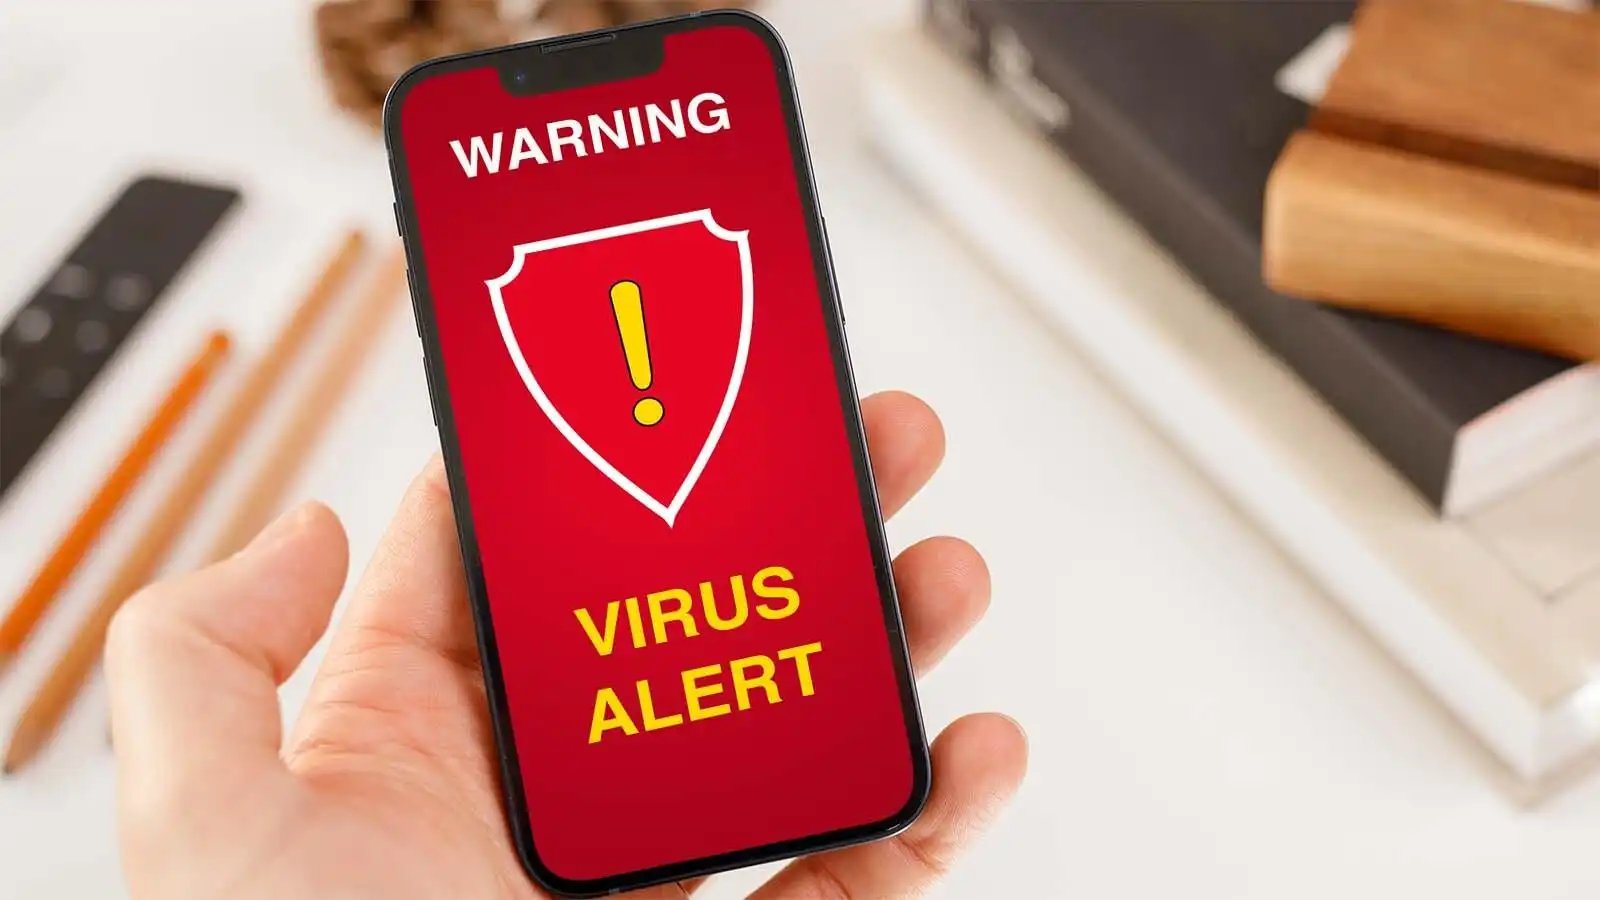 Do You Need To Worry About IPhone Viruses?